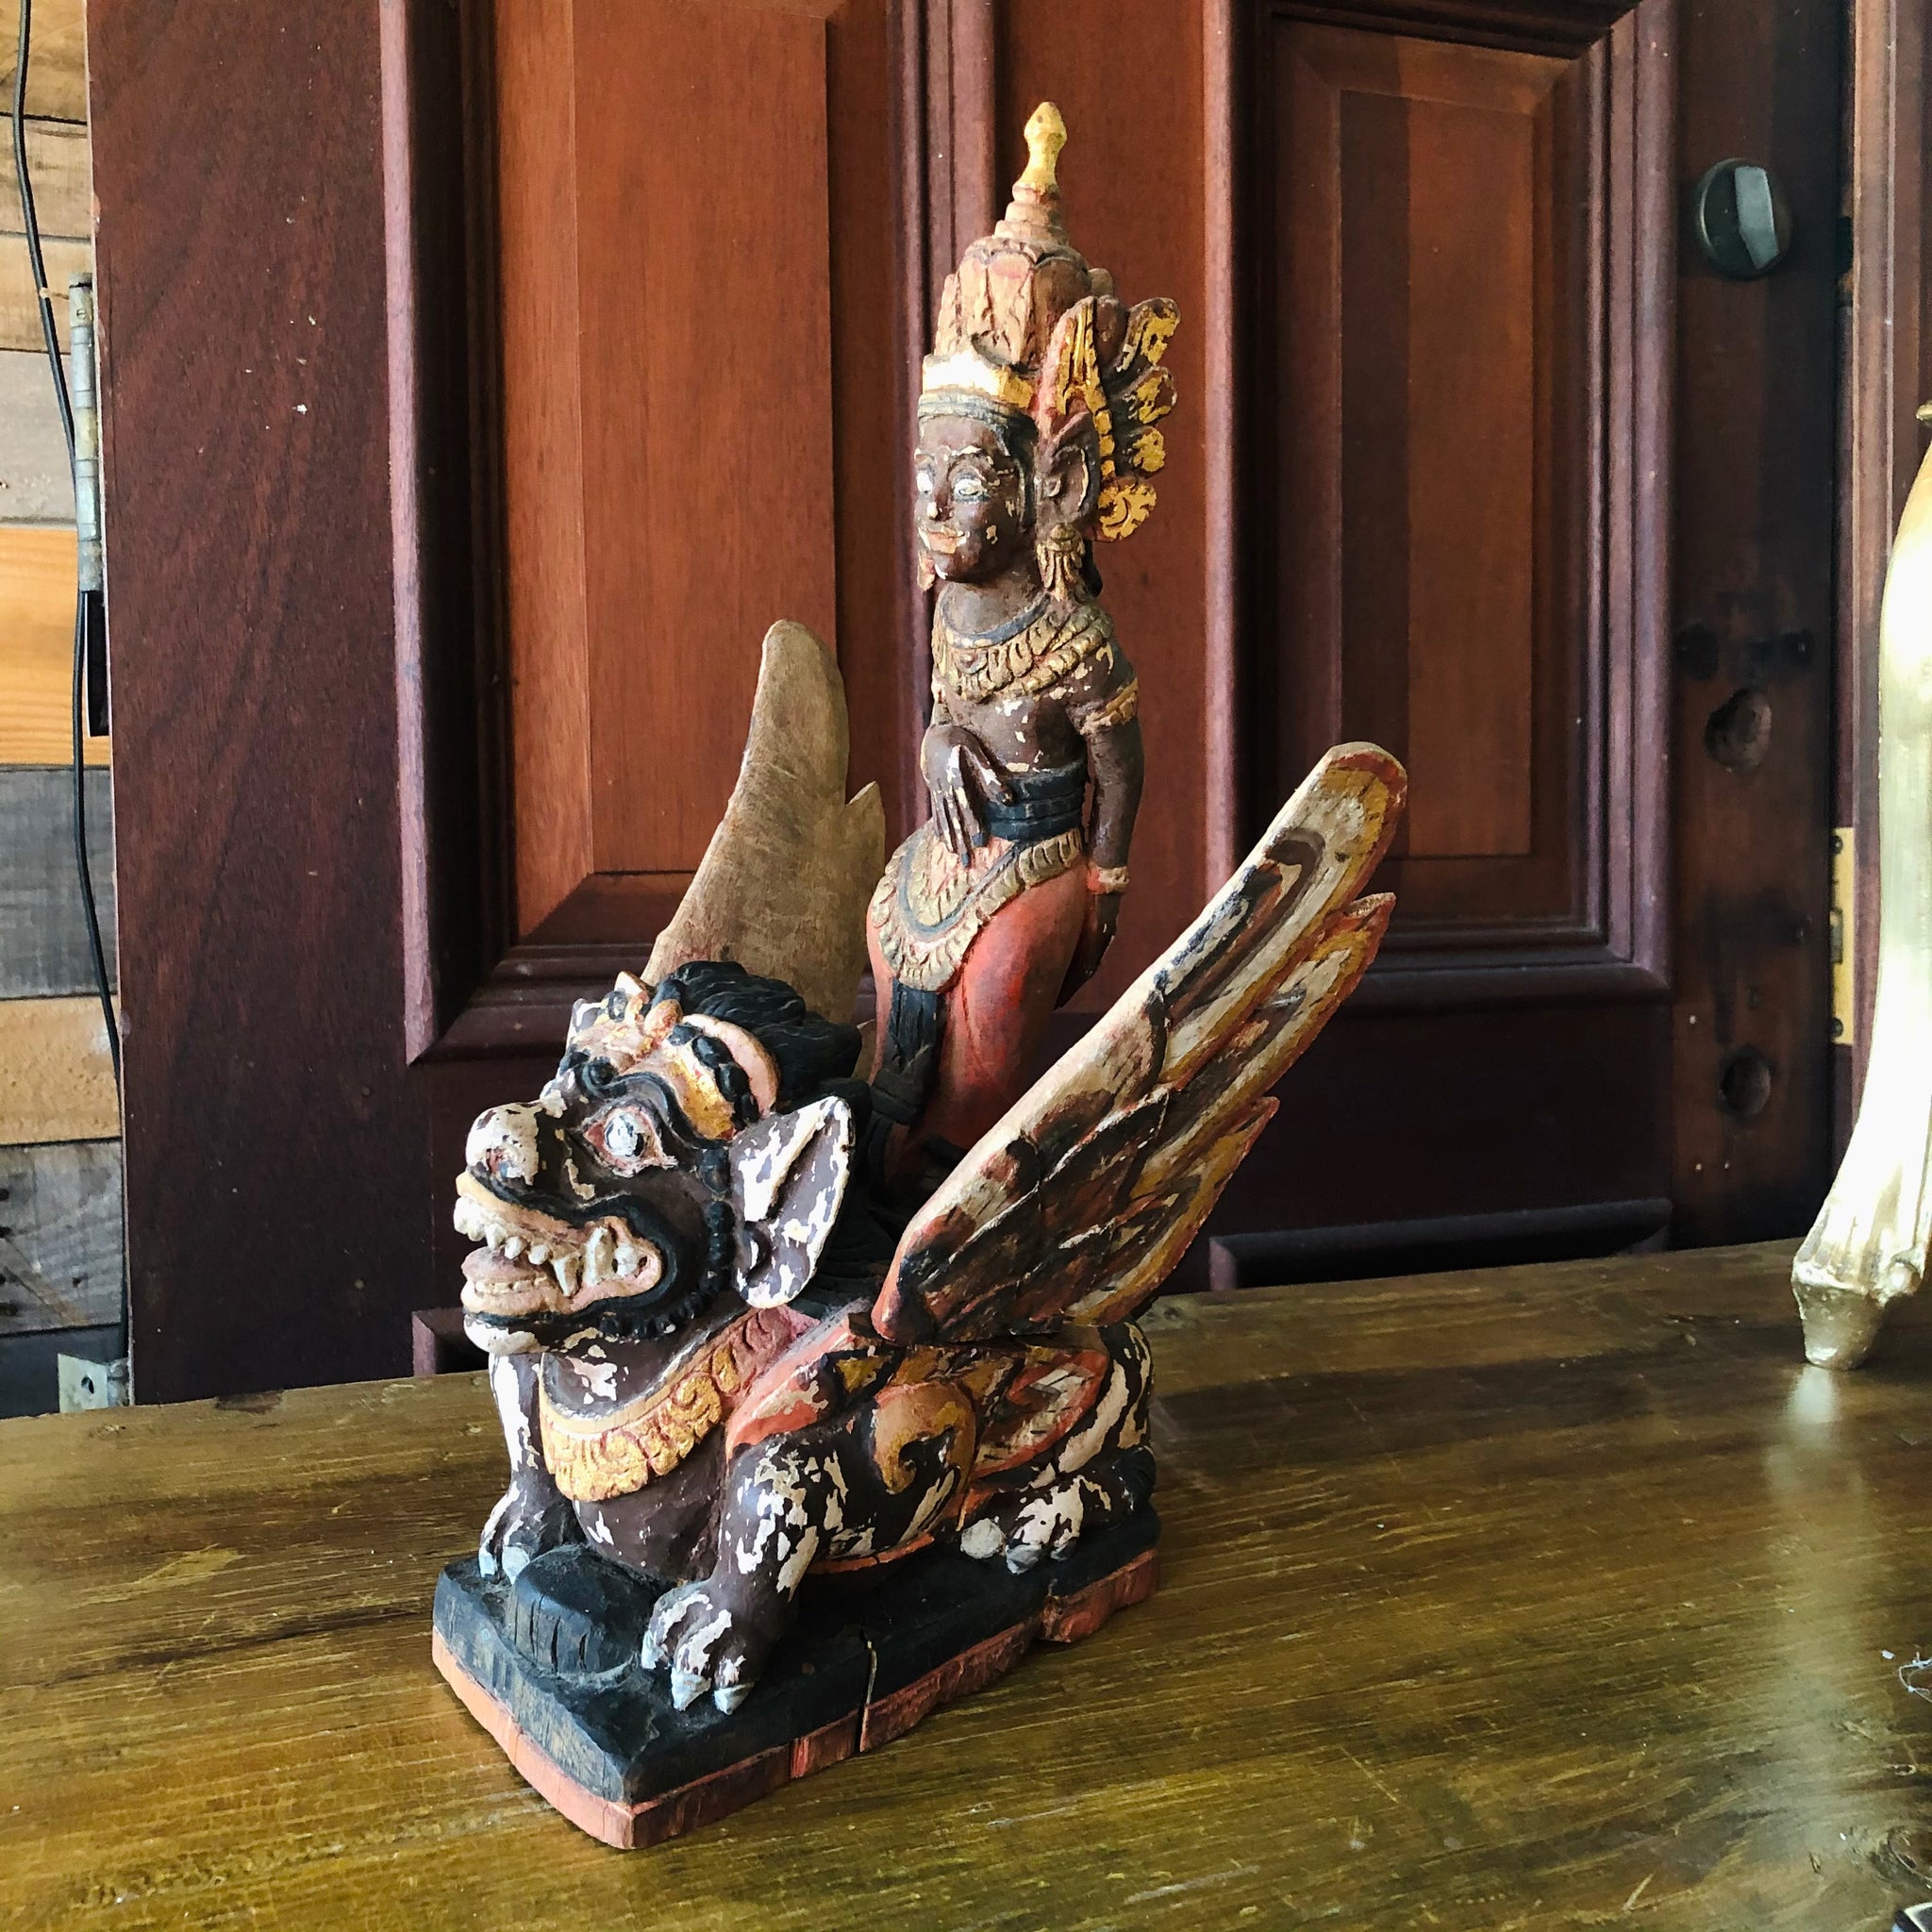 Carved Wood Dragon Statue from Bali